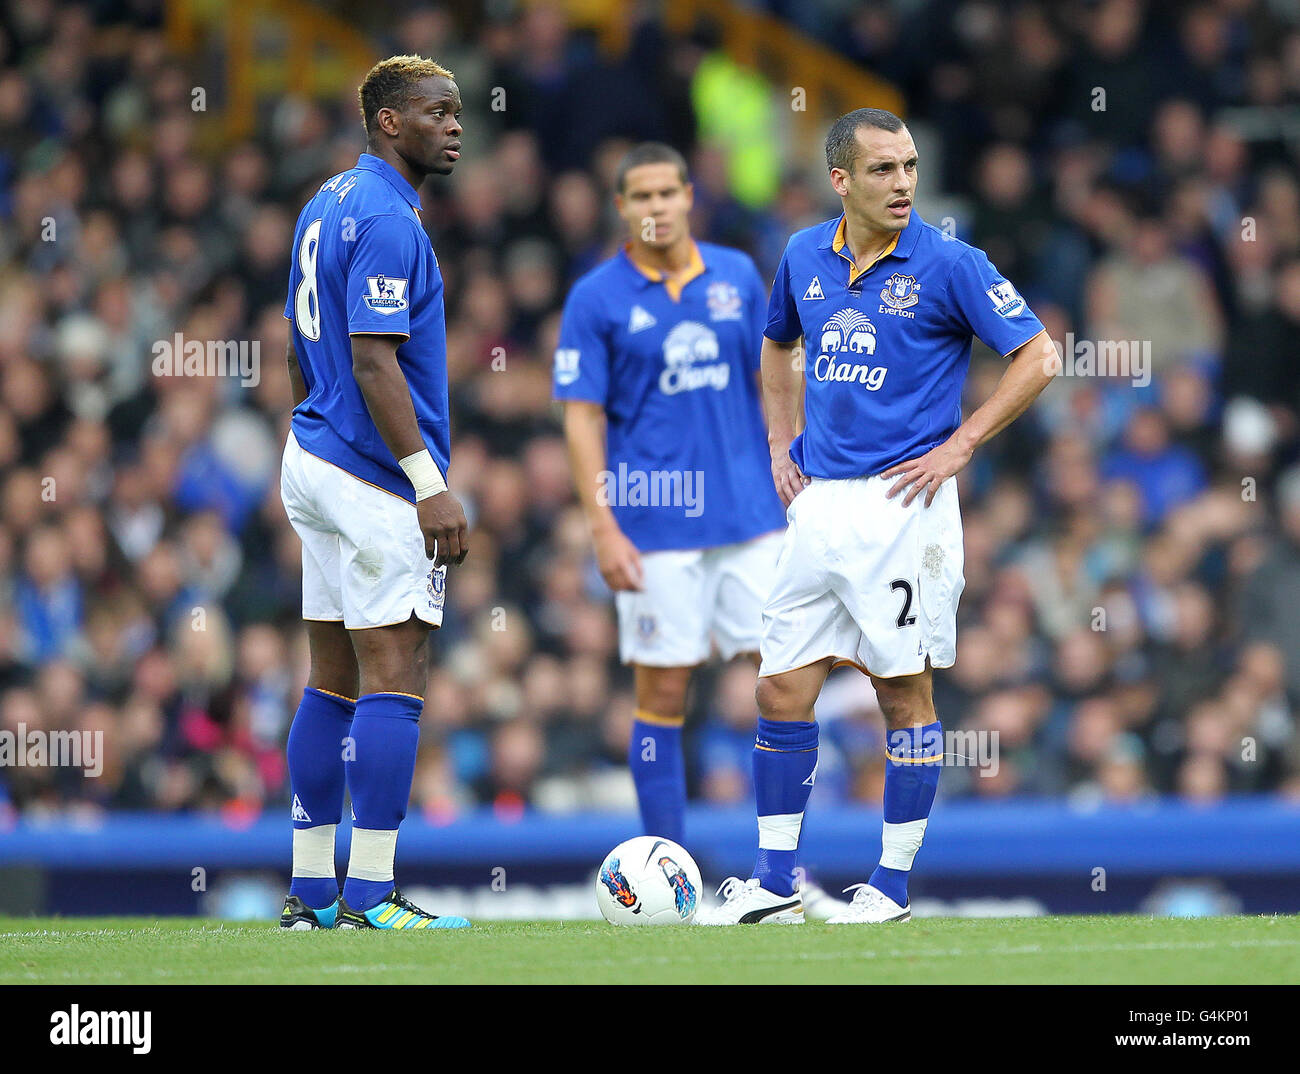 Everton's Louis Saha (L) and Leon Osman (R) prepare to restart the game after they concede the first goal of the game Stock Photo